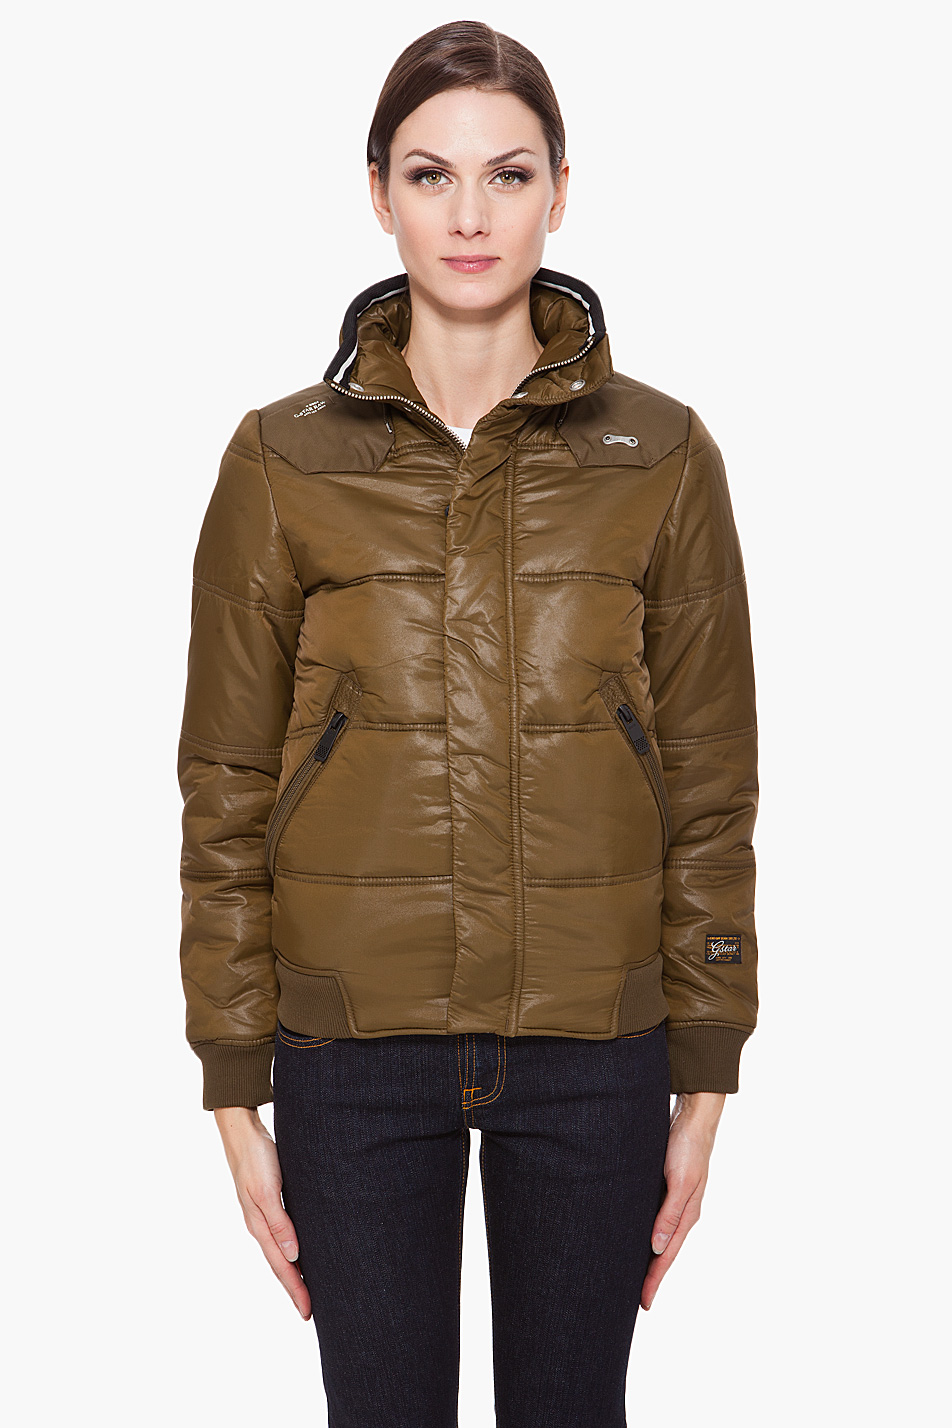 Cheap >g star whistler jacket womens big sale - OFF 73%